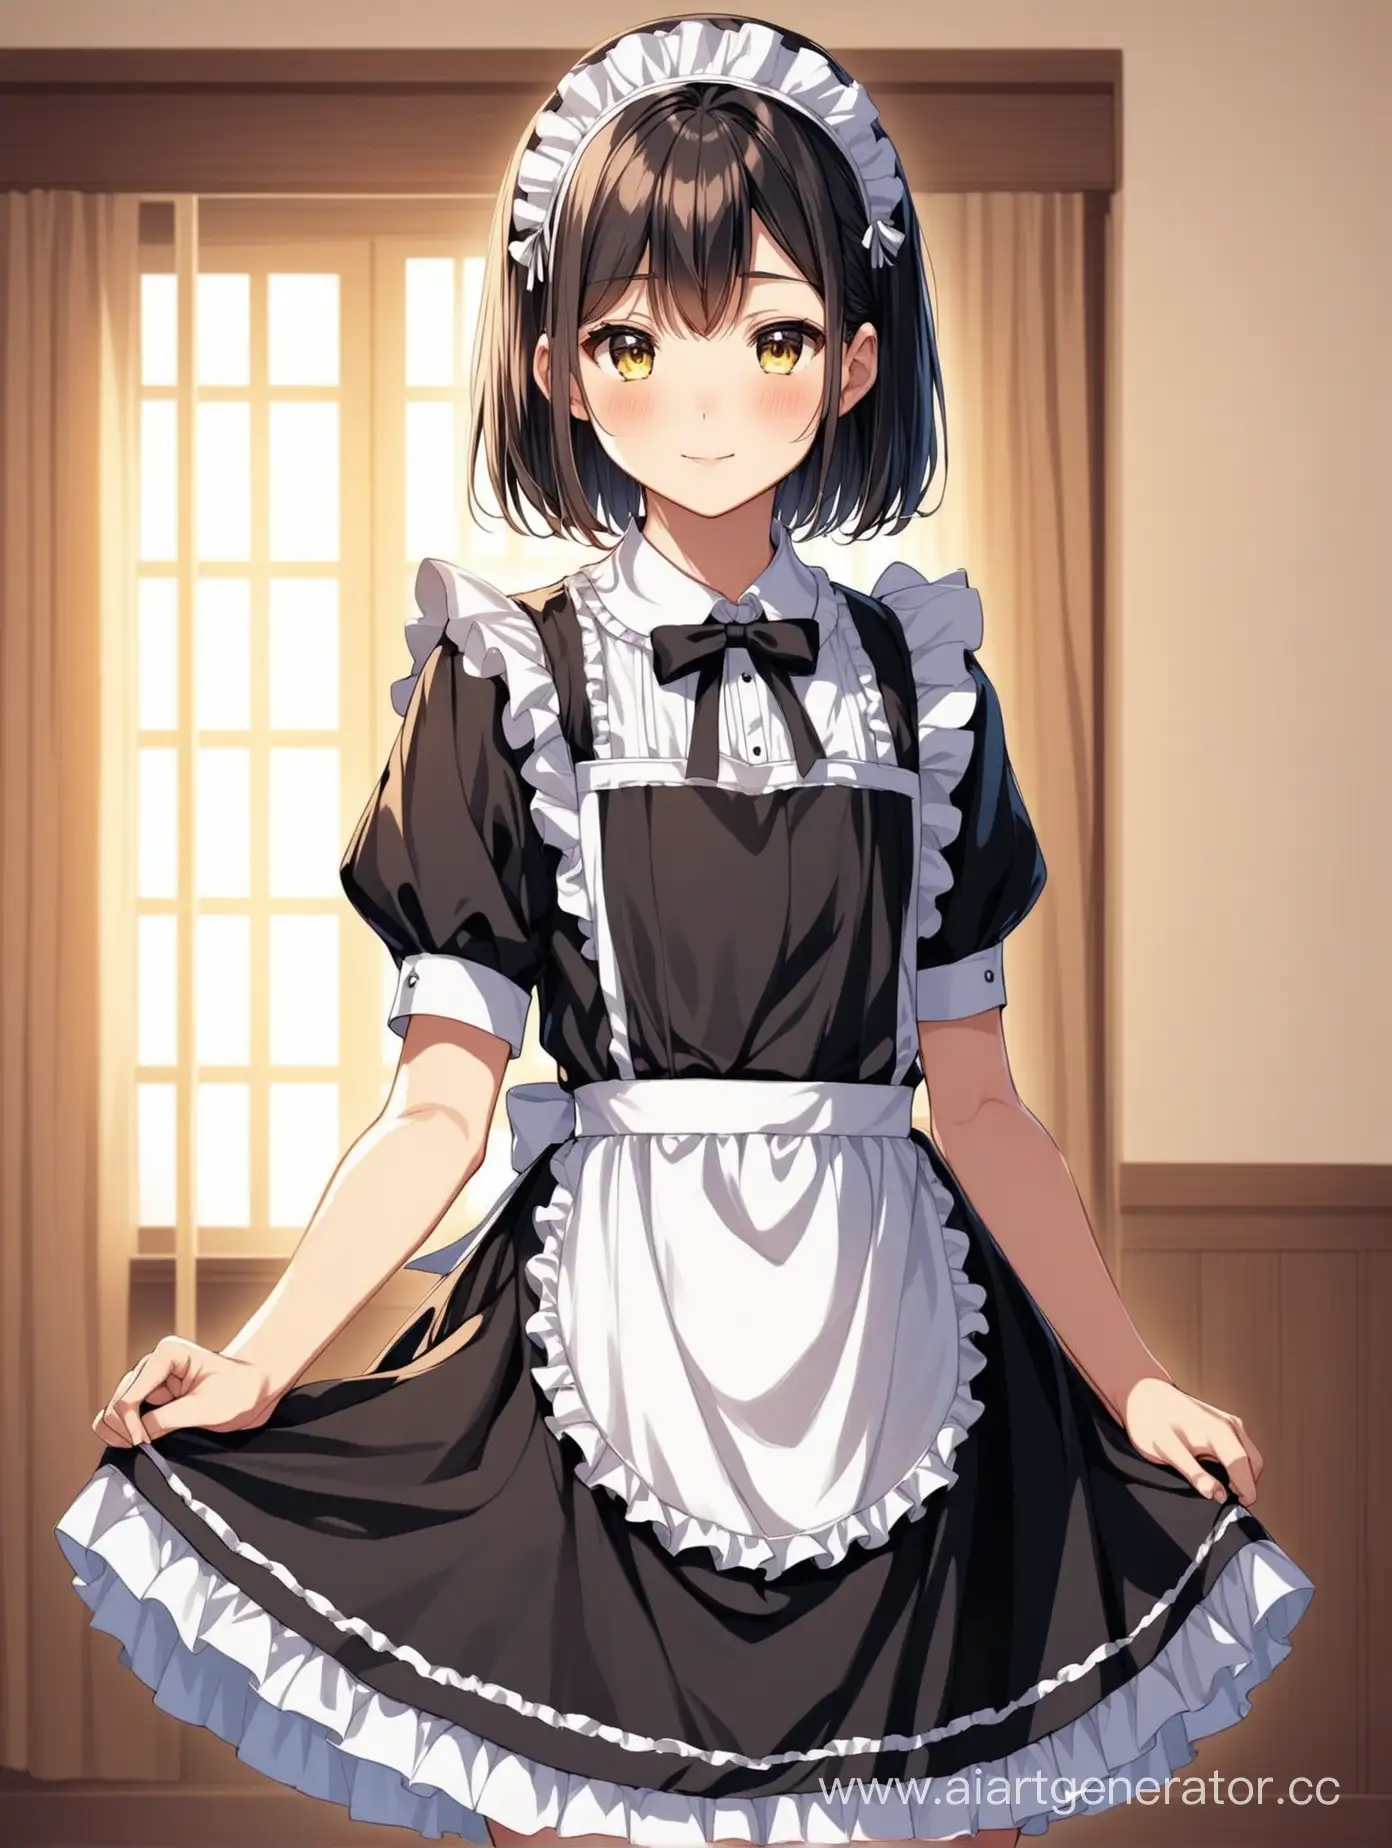 Teenage-Boy-Flaunting-Maid-Costume-with-Confidence